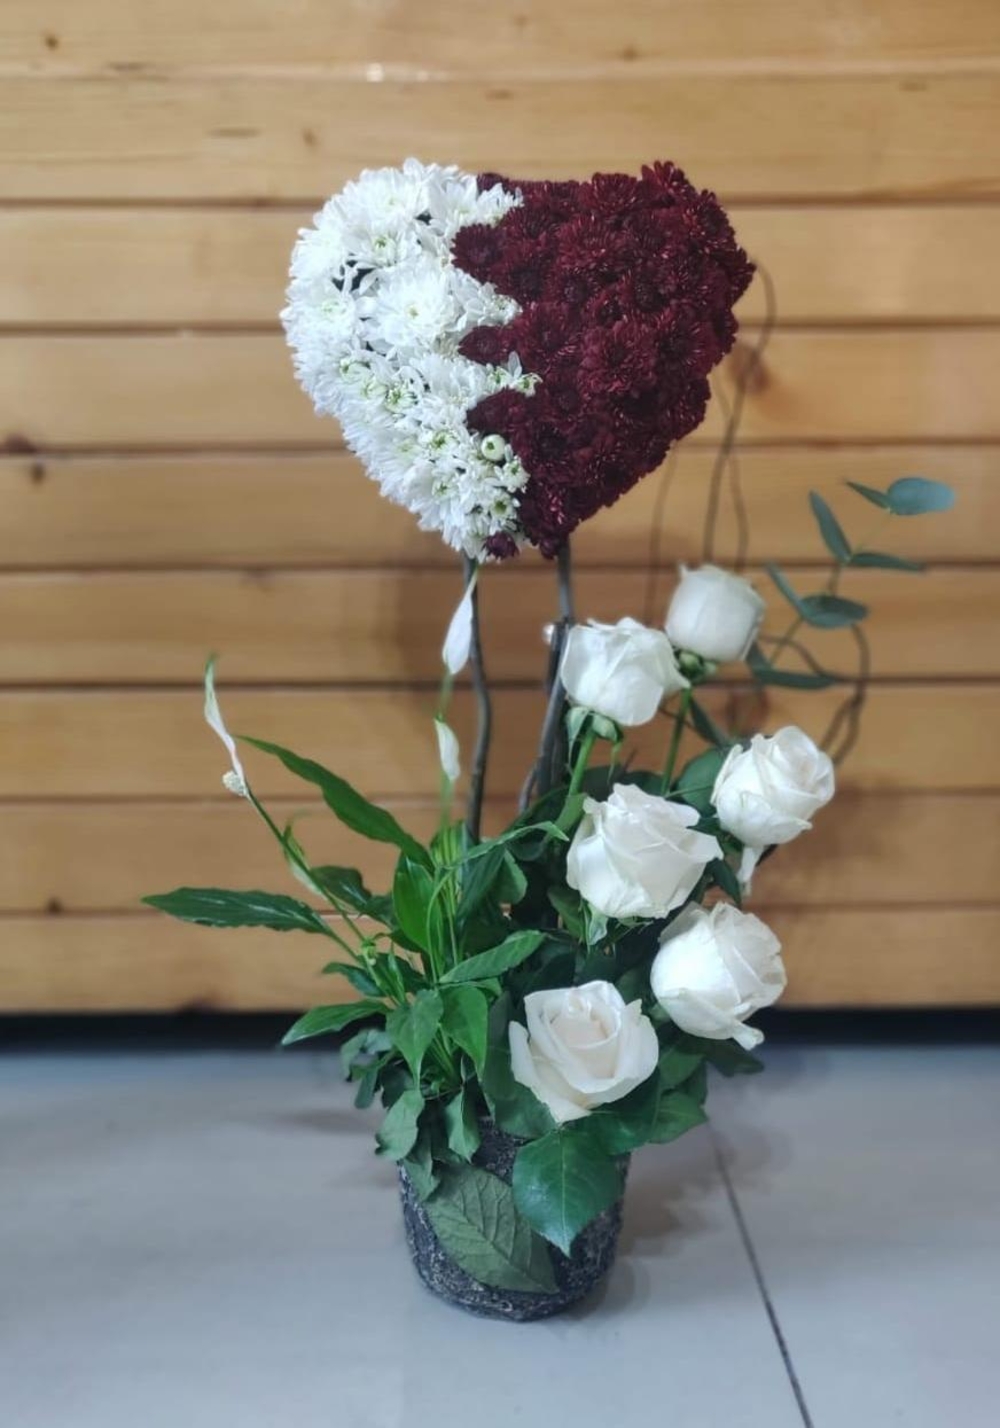 National Plant with Heart Bouquet